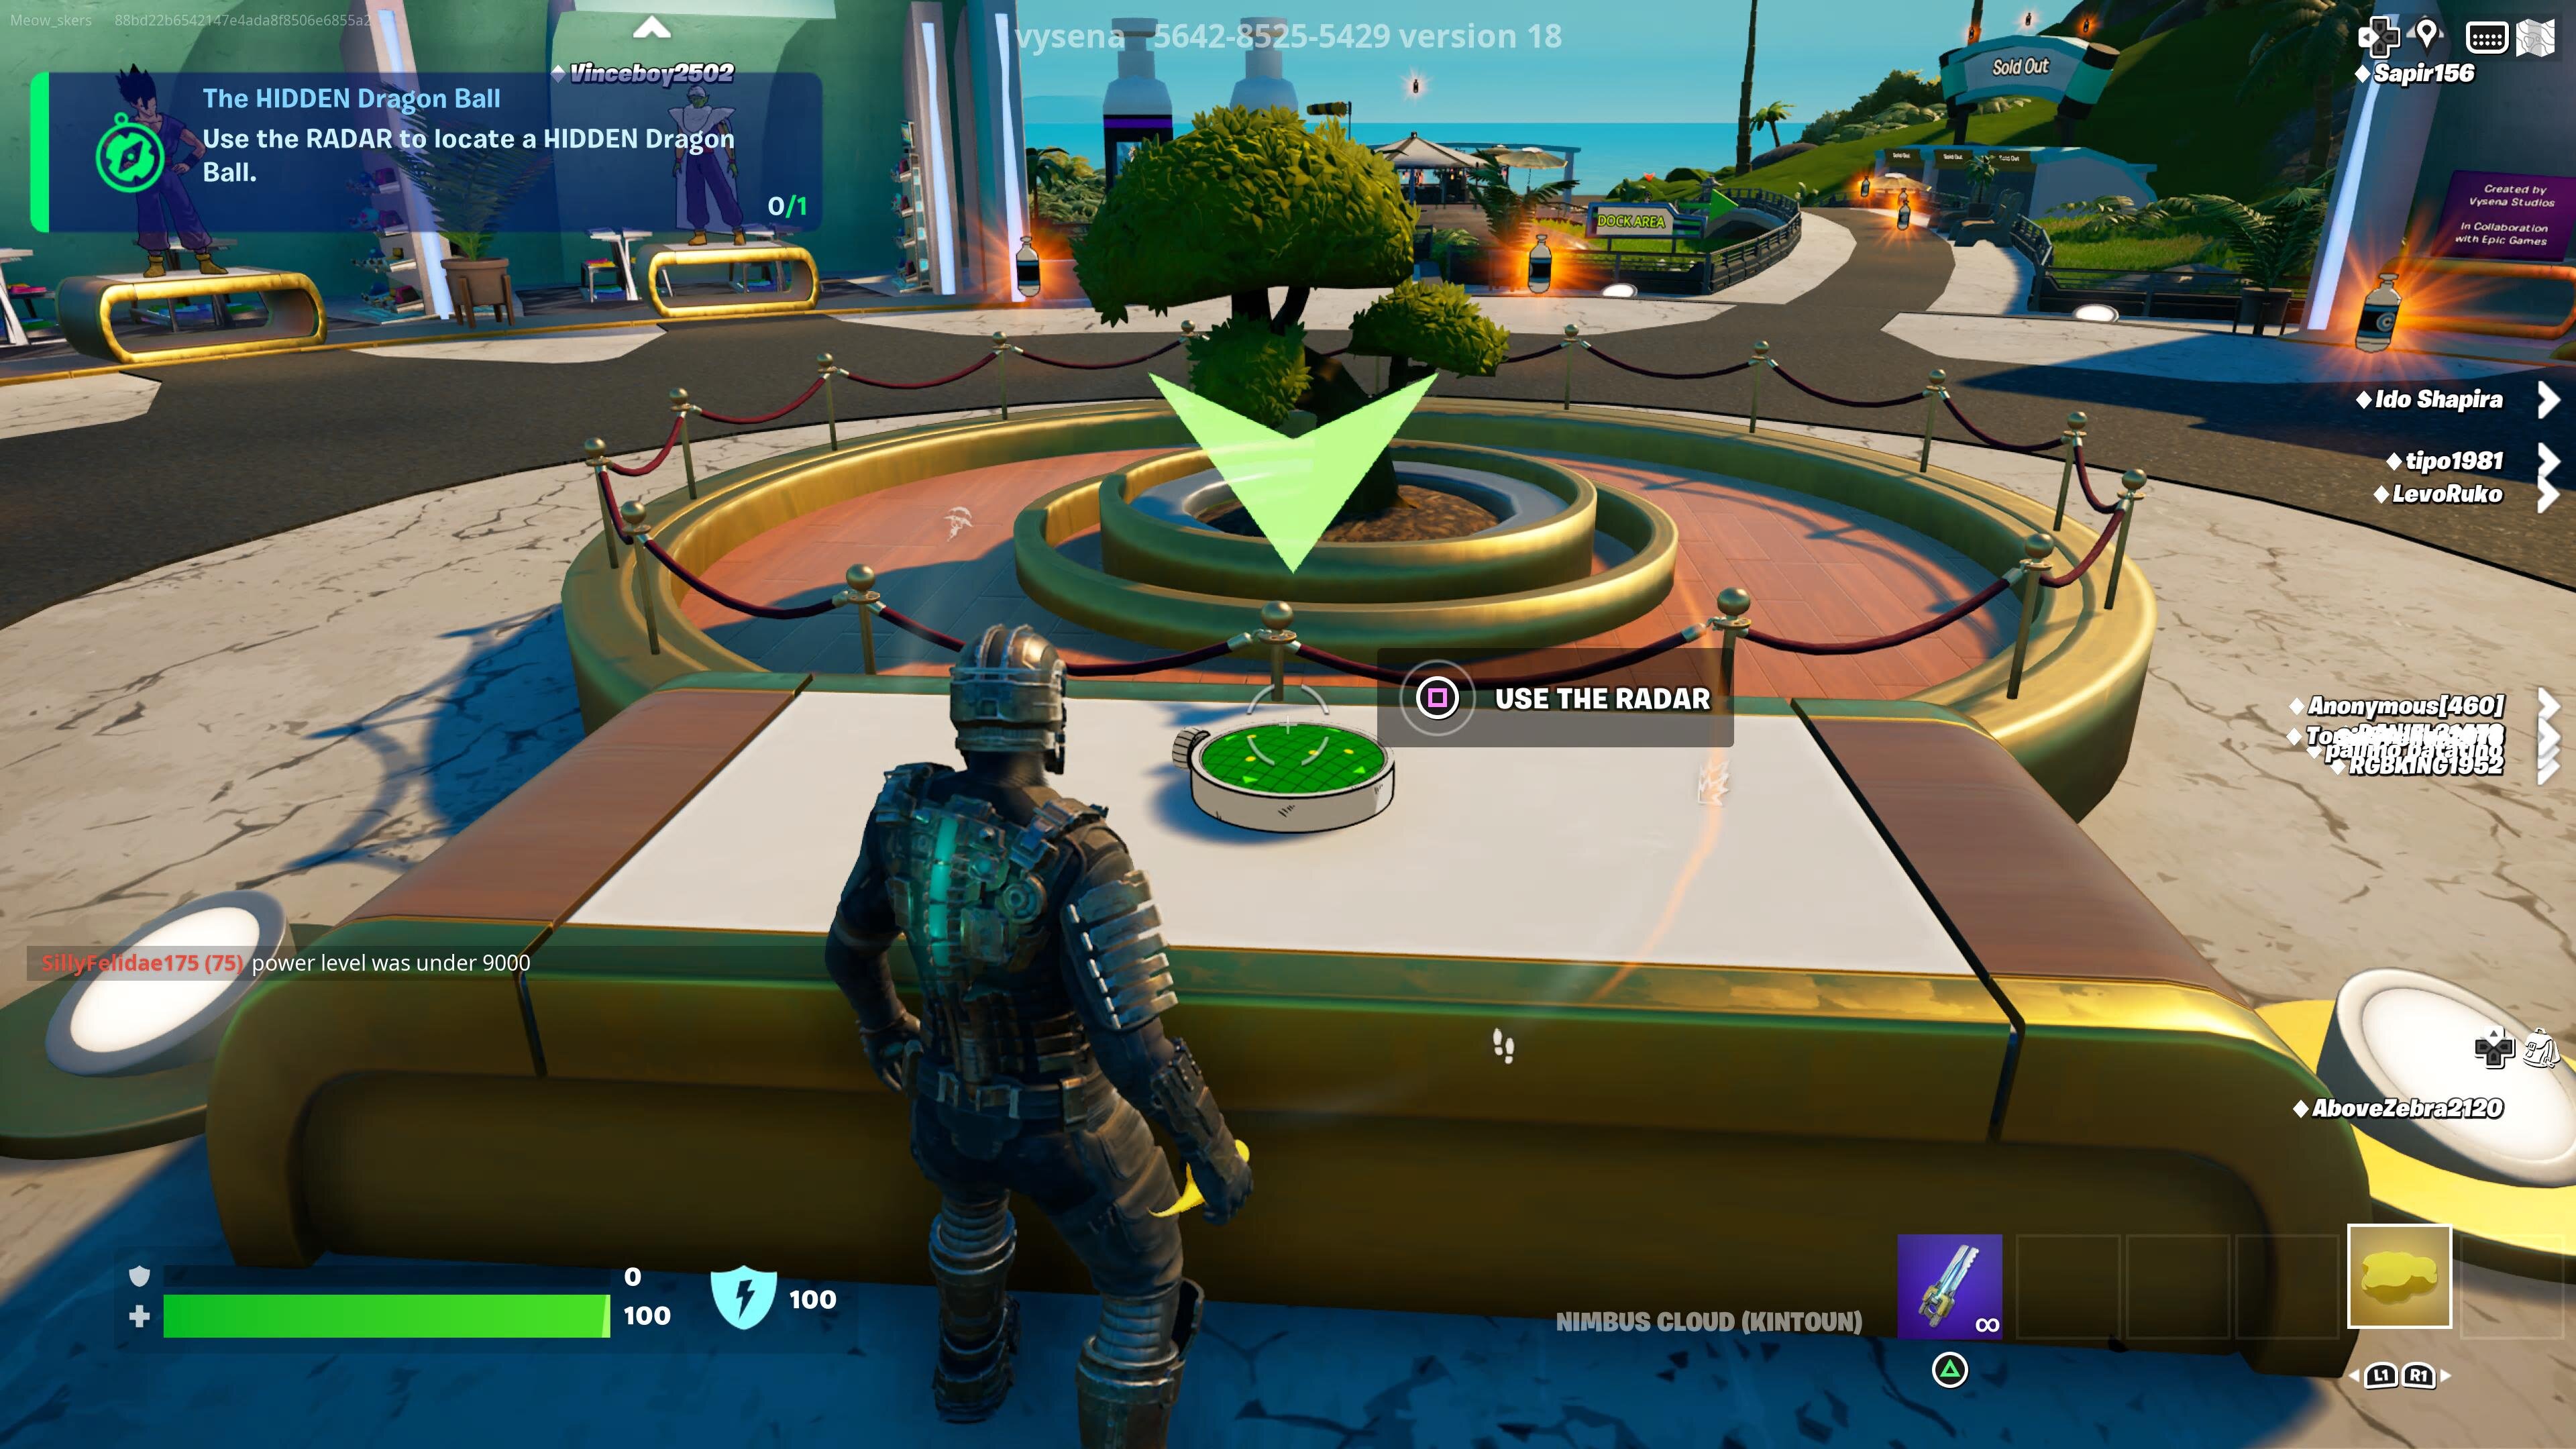 Character next to radar in Fortnite.